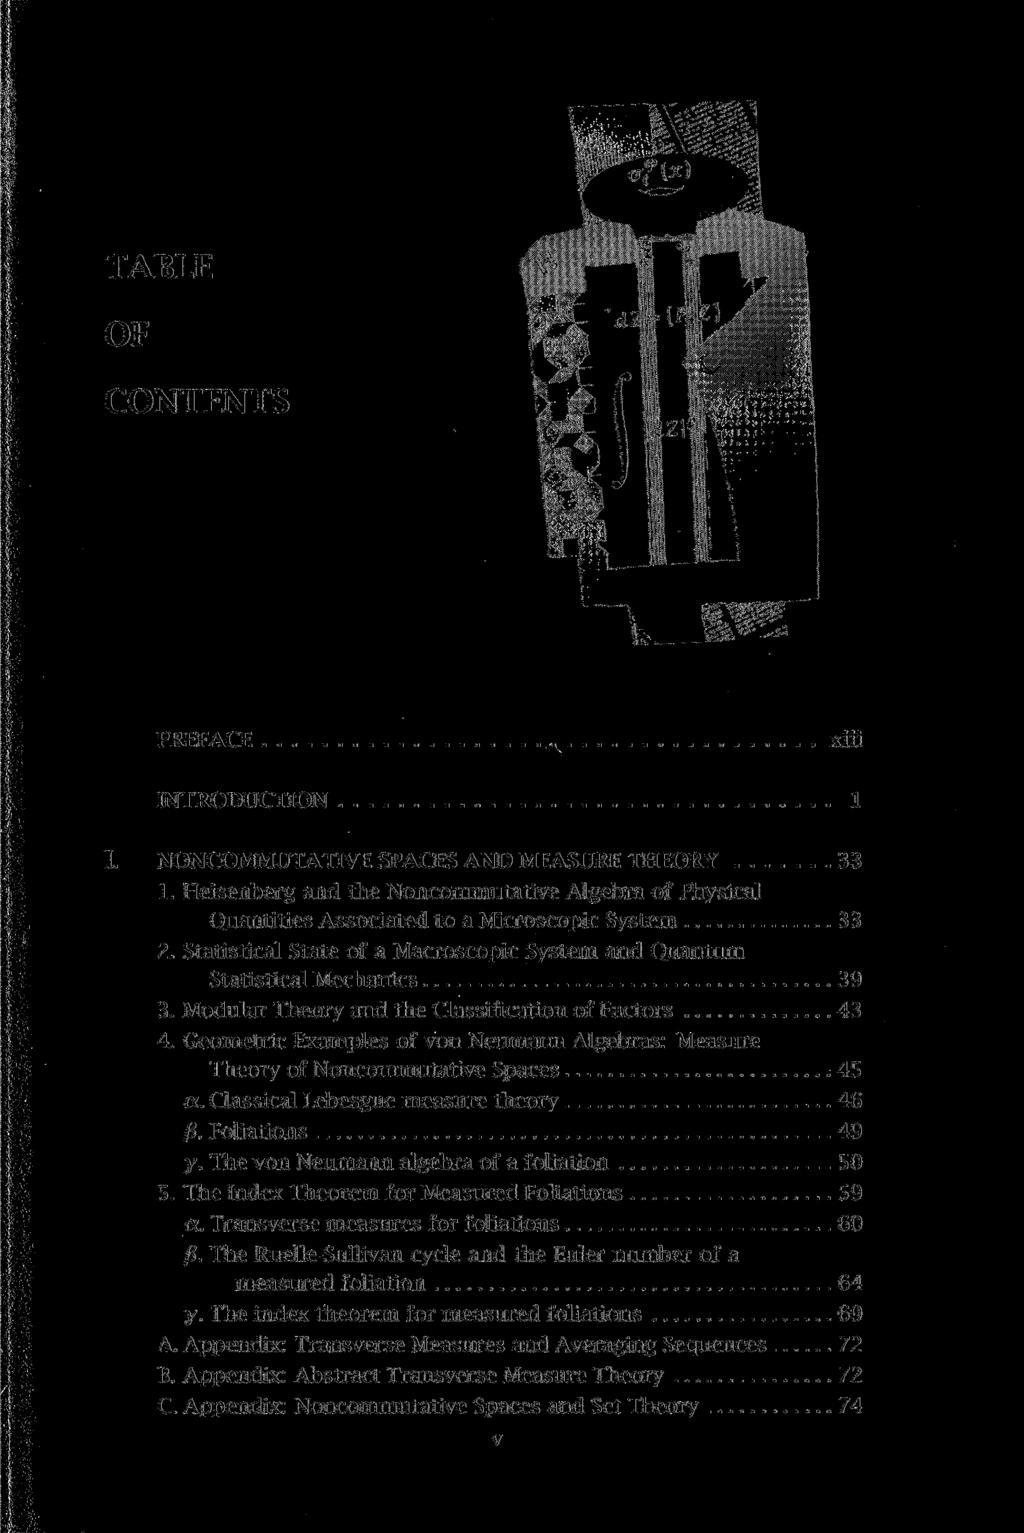 TABLE OF CONTENTS PREFACE xiii INTRODUCTION 1 NONCOMMUTATIVE SPACES AND MEASURE THEORY 33 1. Heisenberg and the Noncommutative Algebra of Physical Quantities Associated to a Microscopic System 33 2.